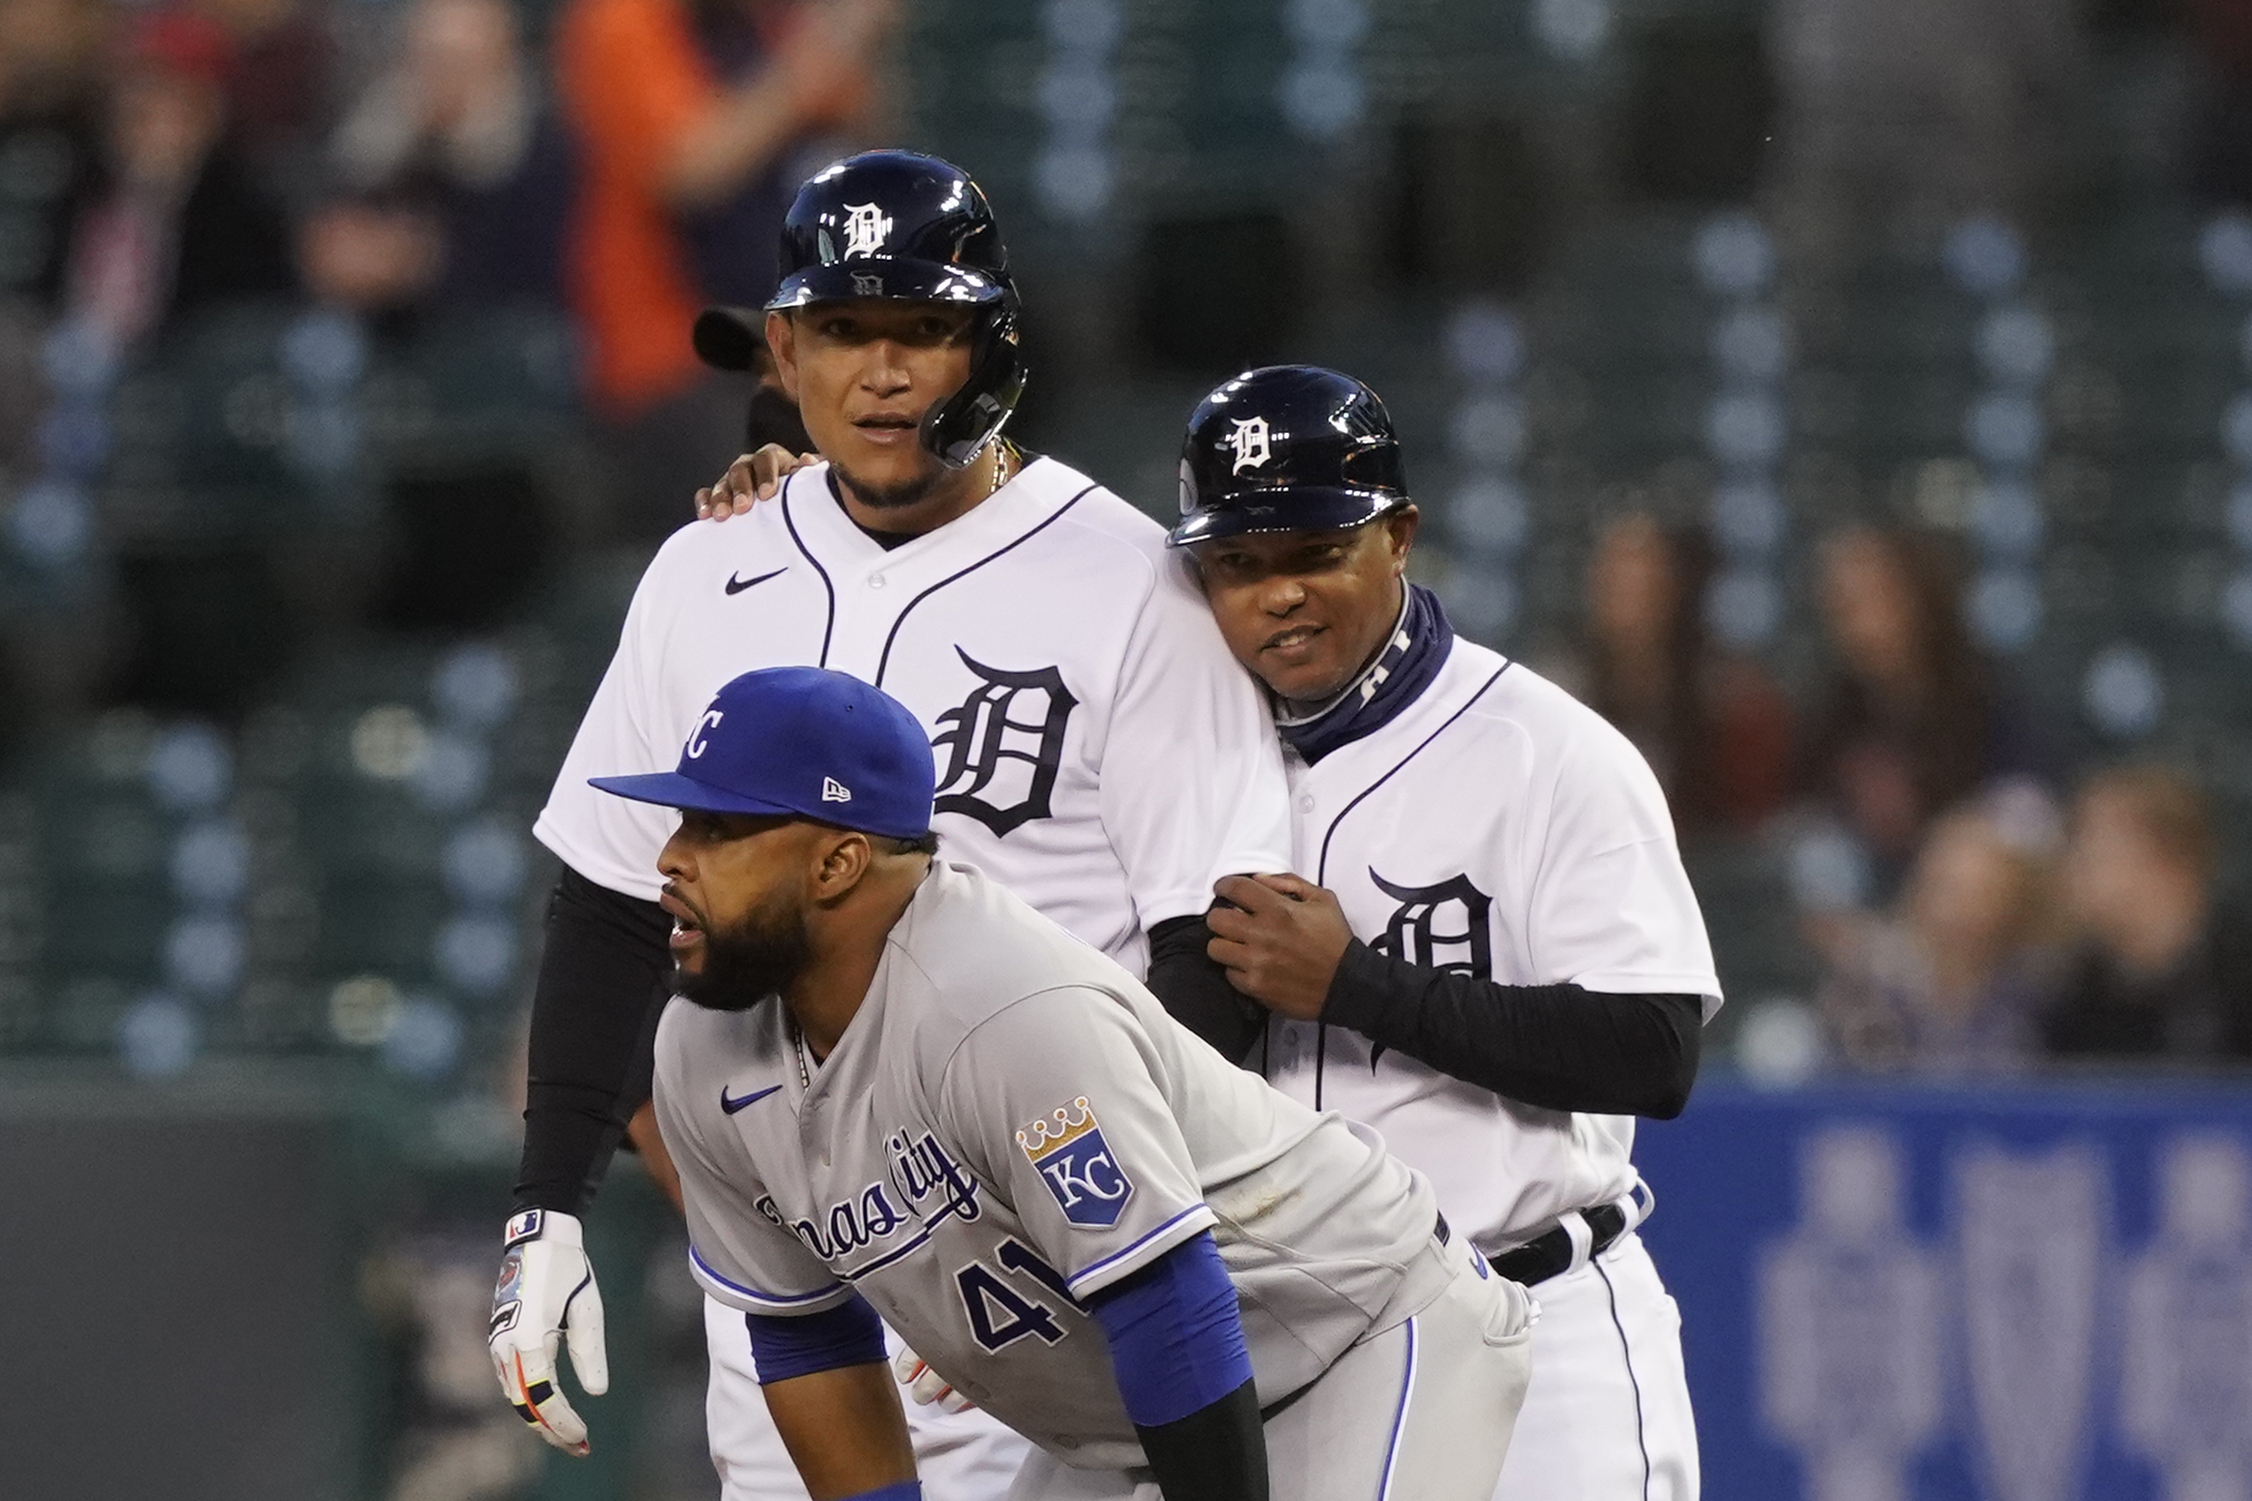 Ramon Santiago will be the Detroit Tigers new first base coach